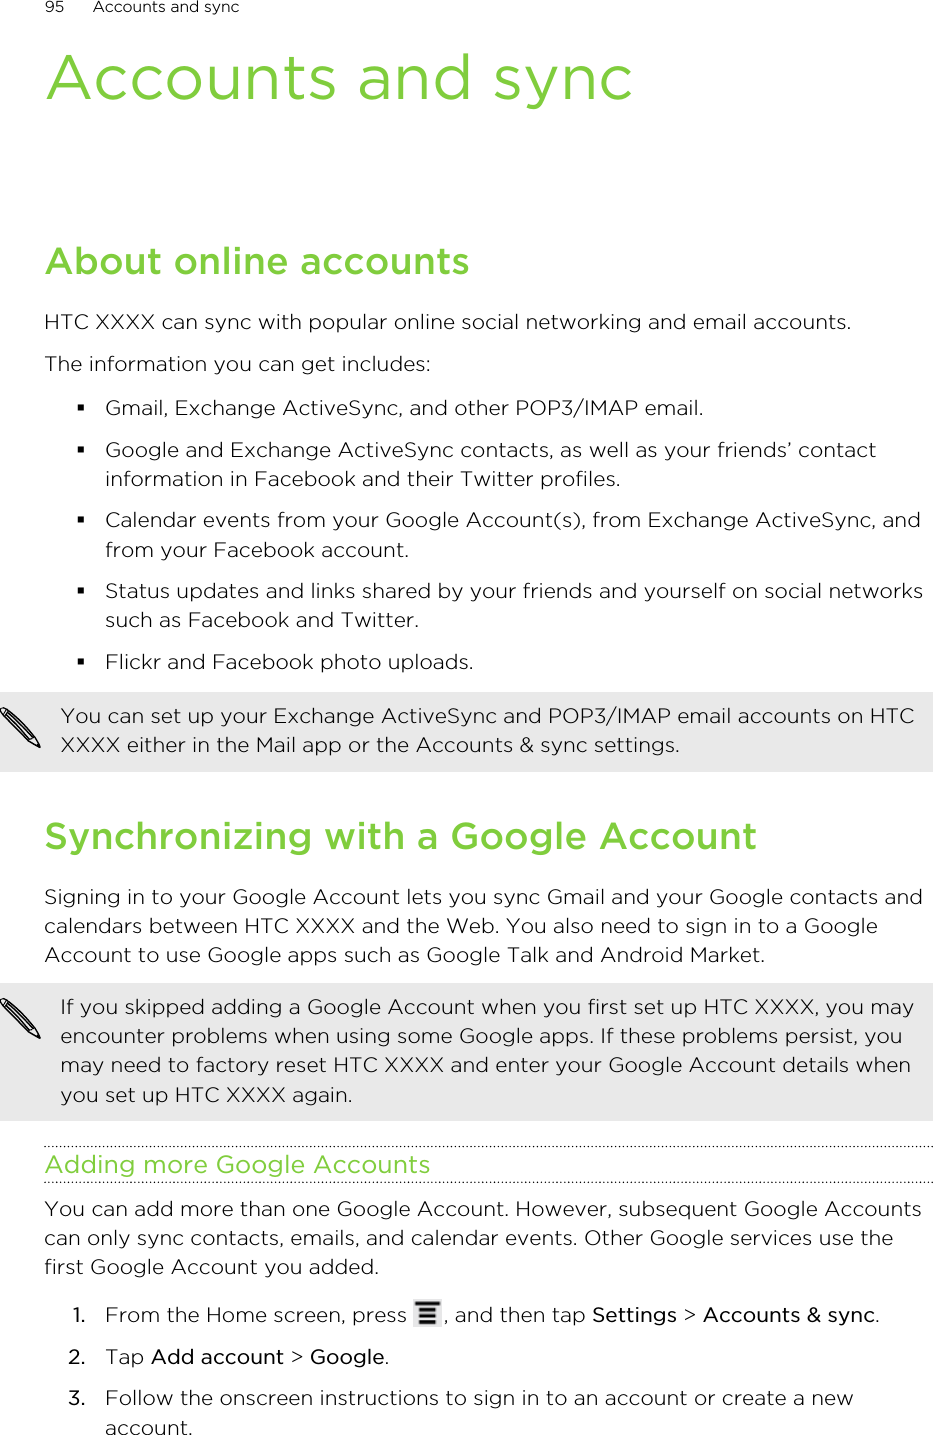 Accounts and syncAbout online accountsHTC XXXX can sync with popular online social networking and email accounts.The information you can get includes:§Gmail, Exchange ActiveSync, and other POP3/IMAP email.§Google and Exchange ActiveSync contacts, as well as your friends’ contactinformation in Facebook and their Twitter profiles.§Calendar events from your Google Account(s), from Exchange ActiveSync, andfrom your Facebook account.§Status updates and links shared by your friends and yourself on social networkssuch as Facebook and Twitter.§Flickr and Facebook photo uploads.You can set up your Exchange ActiveSync and POP3/IMAP email accounts on HTCXXXX either in the Mail app or the Accounts &amp; sync settings.Synchronizing with a Google AccountSigning in to your Google Account lets you sync Gmail and your Google contacts andcalendars between HTC XXXX and the Web. You also need to sign in to a GoogleAccount to use Google apps such as Google Talk and Android Market.If you skipped adding a Google Account when you first set up HTC XXXX, you mayencounter problems when using some Google apps. If these problems persist, youmay need to factory reset HTC XXXX and enter your Google Account details whenyou set up HTC XXXX again.Adding more Google AccountsYou can add more than one Google Account. However, subsequent Google Accountscan only sync contacts, emails, and calendar events. Other Google services use thefirst Google Account you added.1. From the Home screen, press  , and then tap Settings &gt; Accounts &amp; sync.2. Tap Add account &gt; Google.3. Follow the onscreen instructions to sign in to an account or create a newaccount.95 Accounts and sync